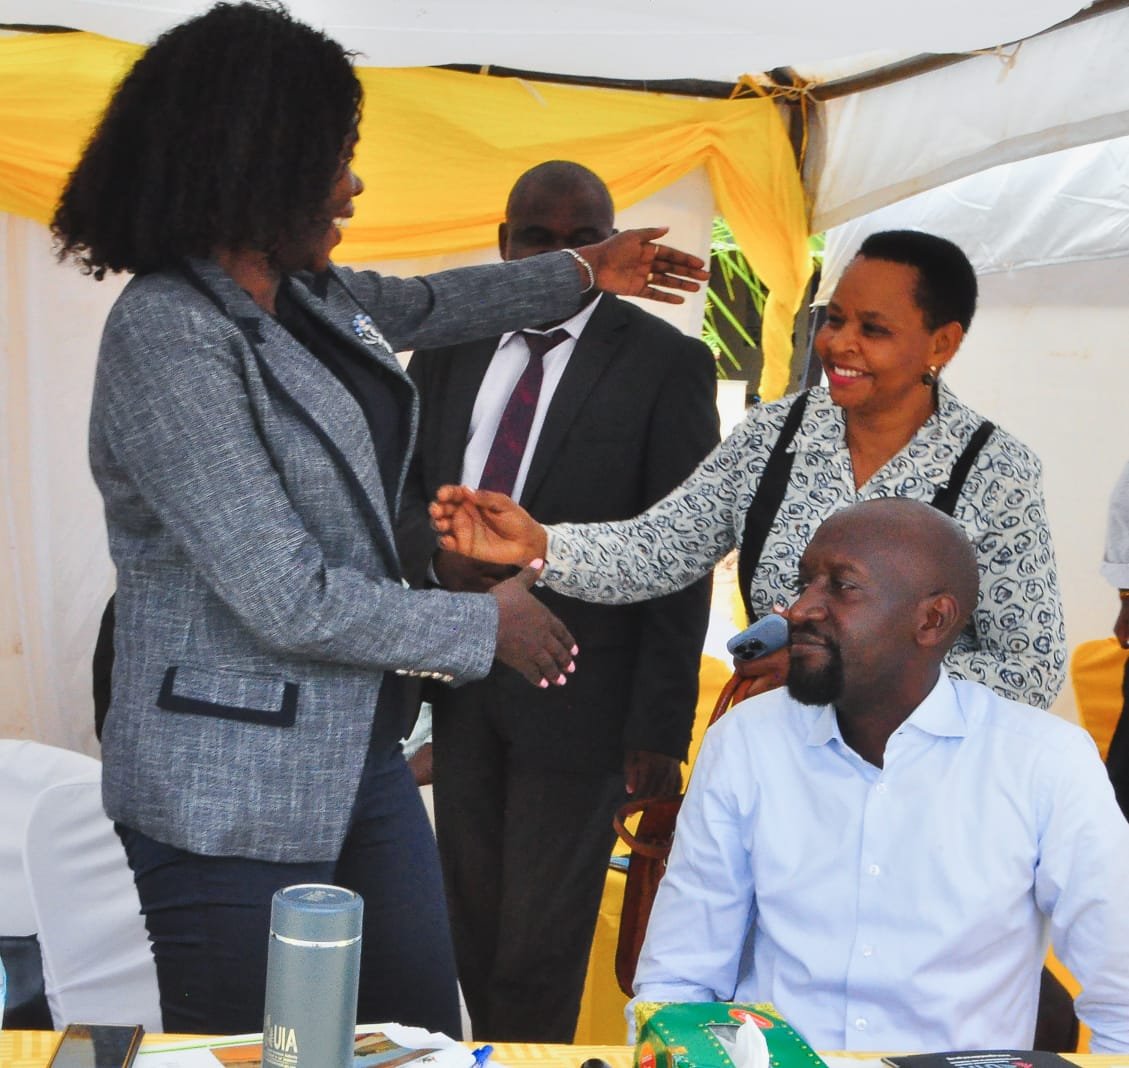 Moments:
Col. Edith Nakalema, the head of @ShieldInvestors being received by Hon. Min. @HonAniteEvelyn, the State Minister of Finance for Investment and Privatization today at the investors Barraza organized by @ugandainvest  at Namanve Industrial Park.
#EmpoweringInvestors